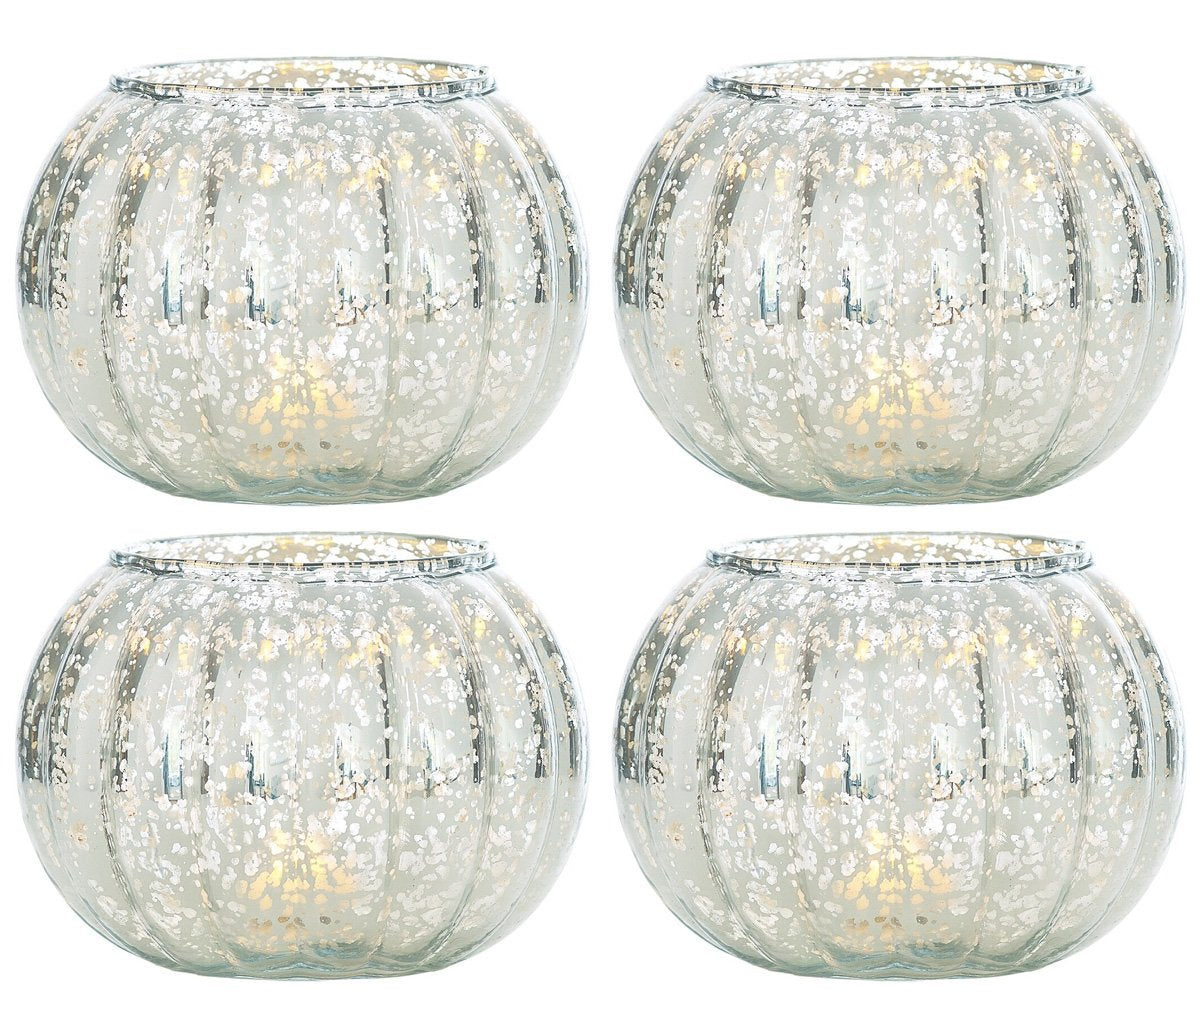 4 Pack | Small Vintage Mercury Glass Candle Holder (3.5-Inch, Autumn Design, Silver) - For Home Decor, Party Decorations, and Wedding Centerpieces - AsianImportStore.com - B2B Wholesale Lighting and Decor